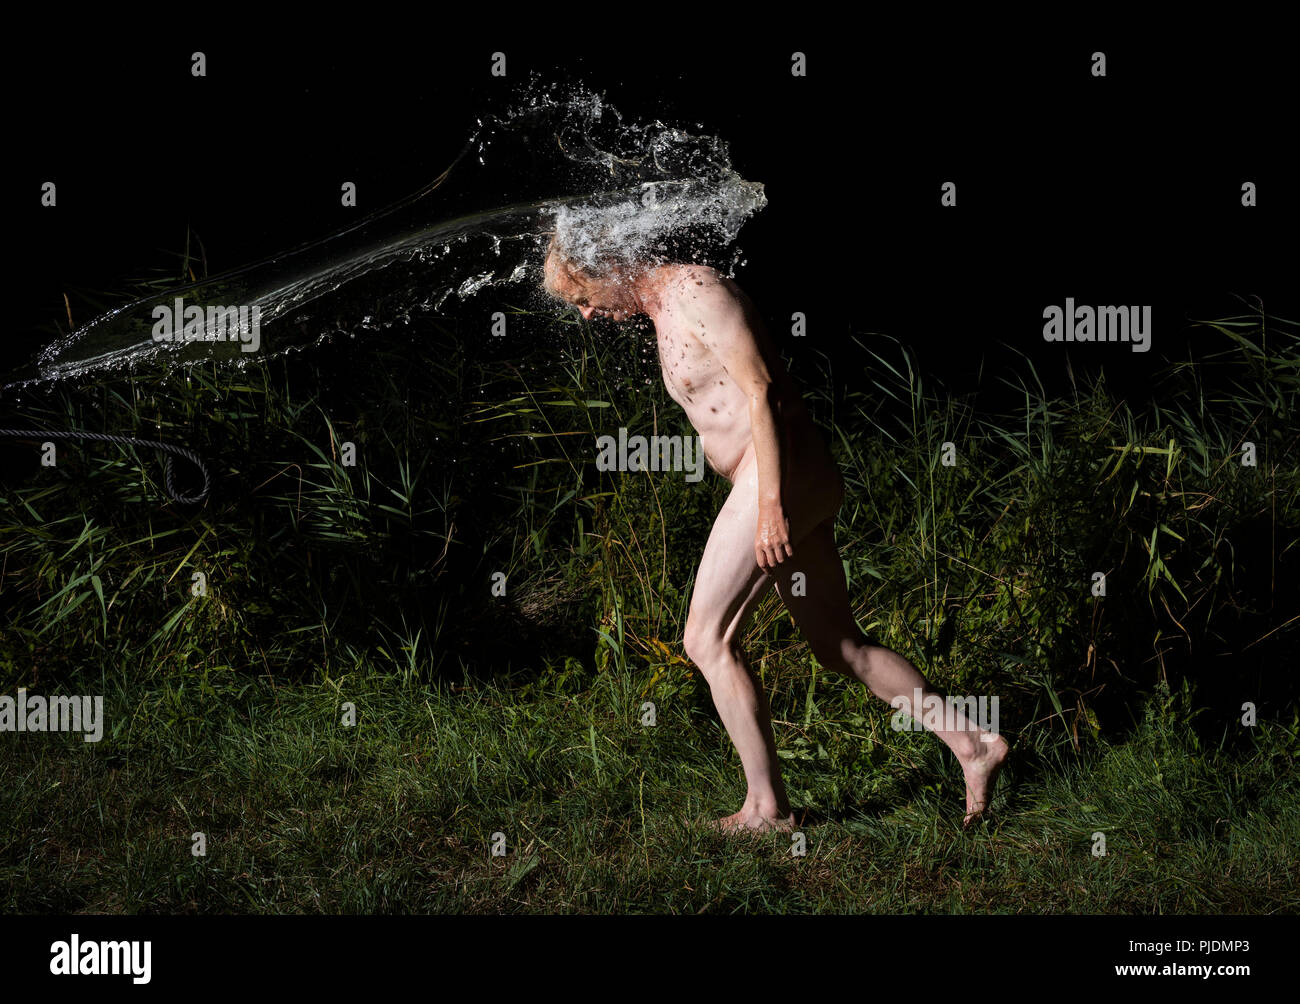 Nude man gets water thrown at him on warm night Stock Photo